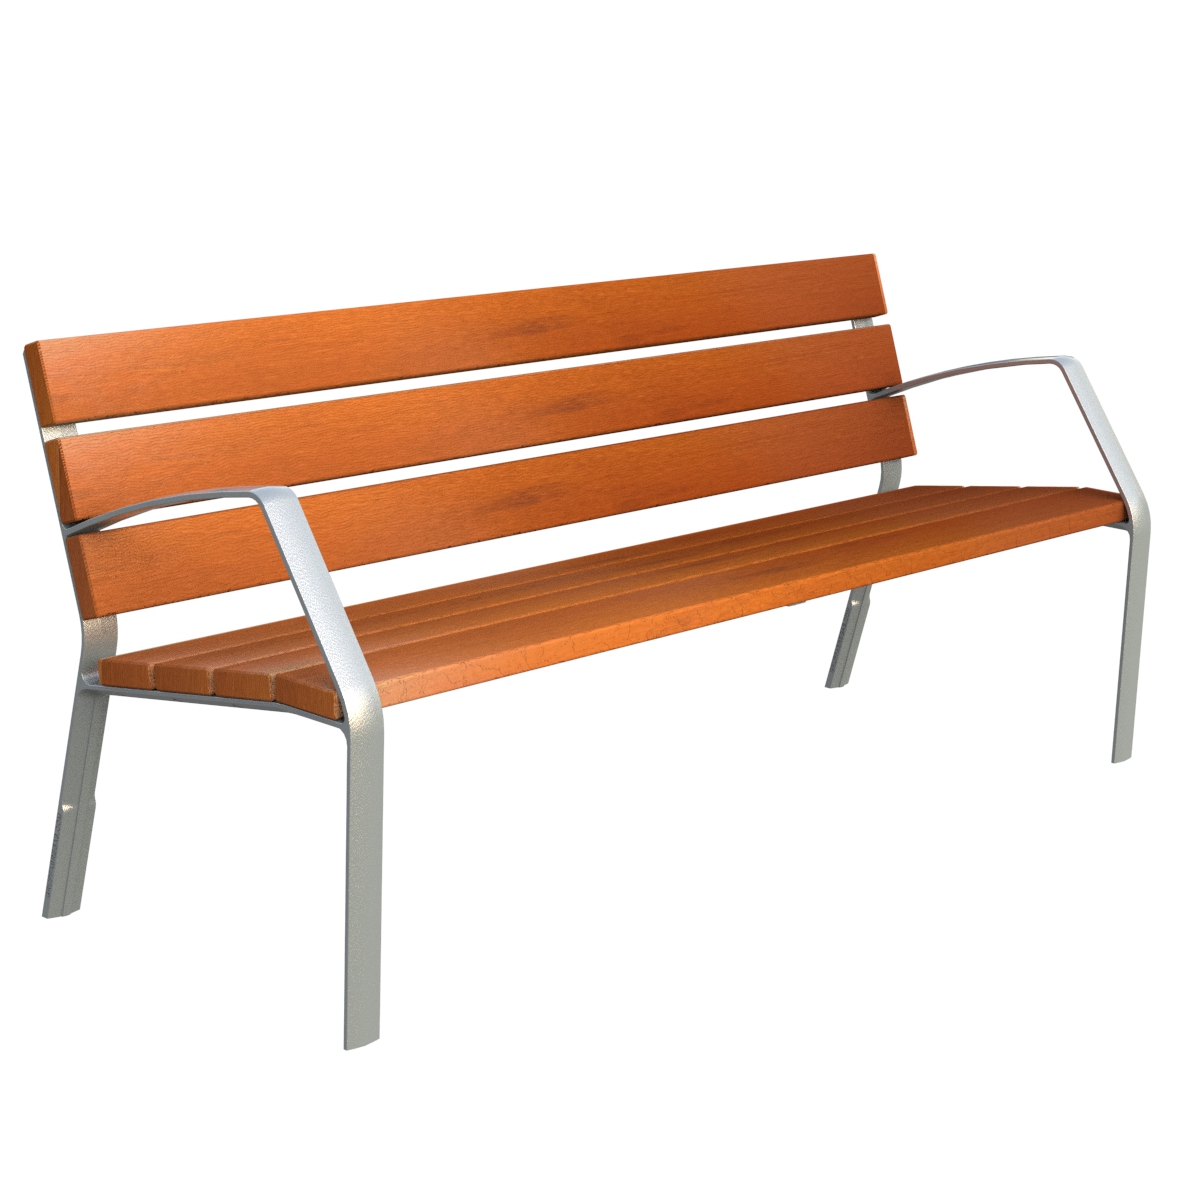 MODO10 Bench in aluminium and tropical wood